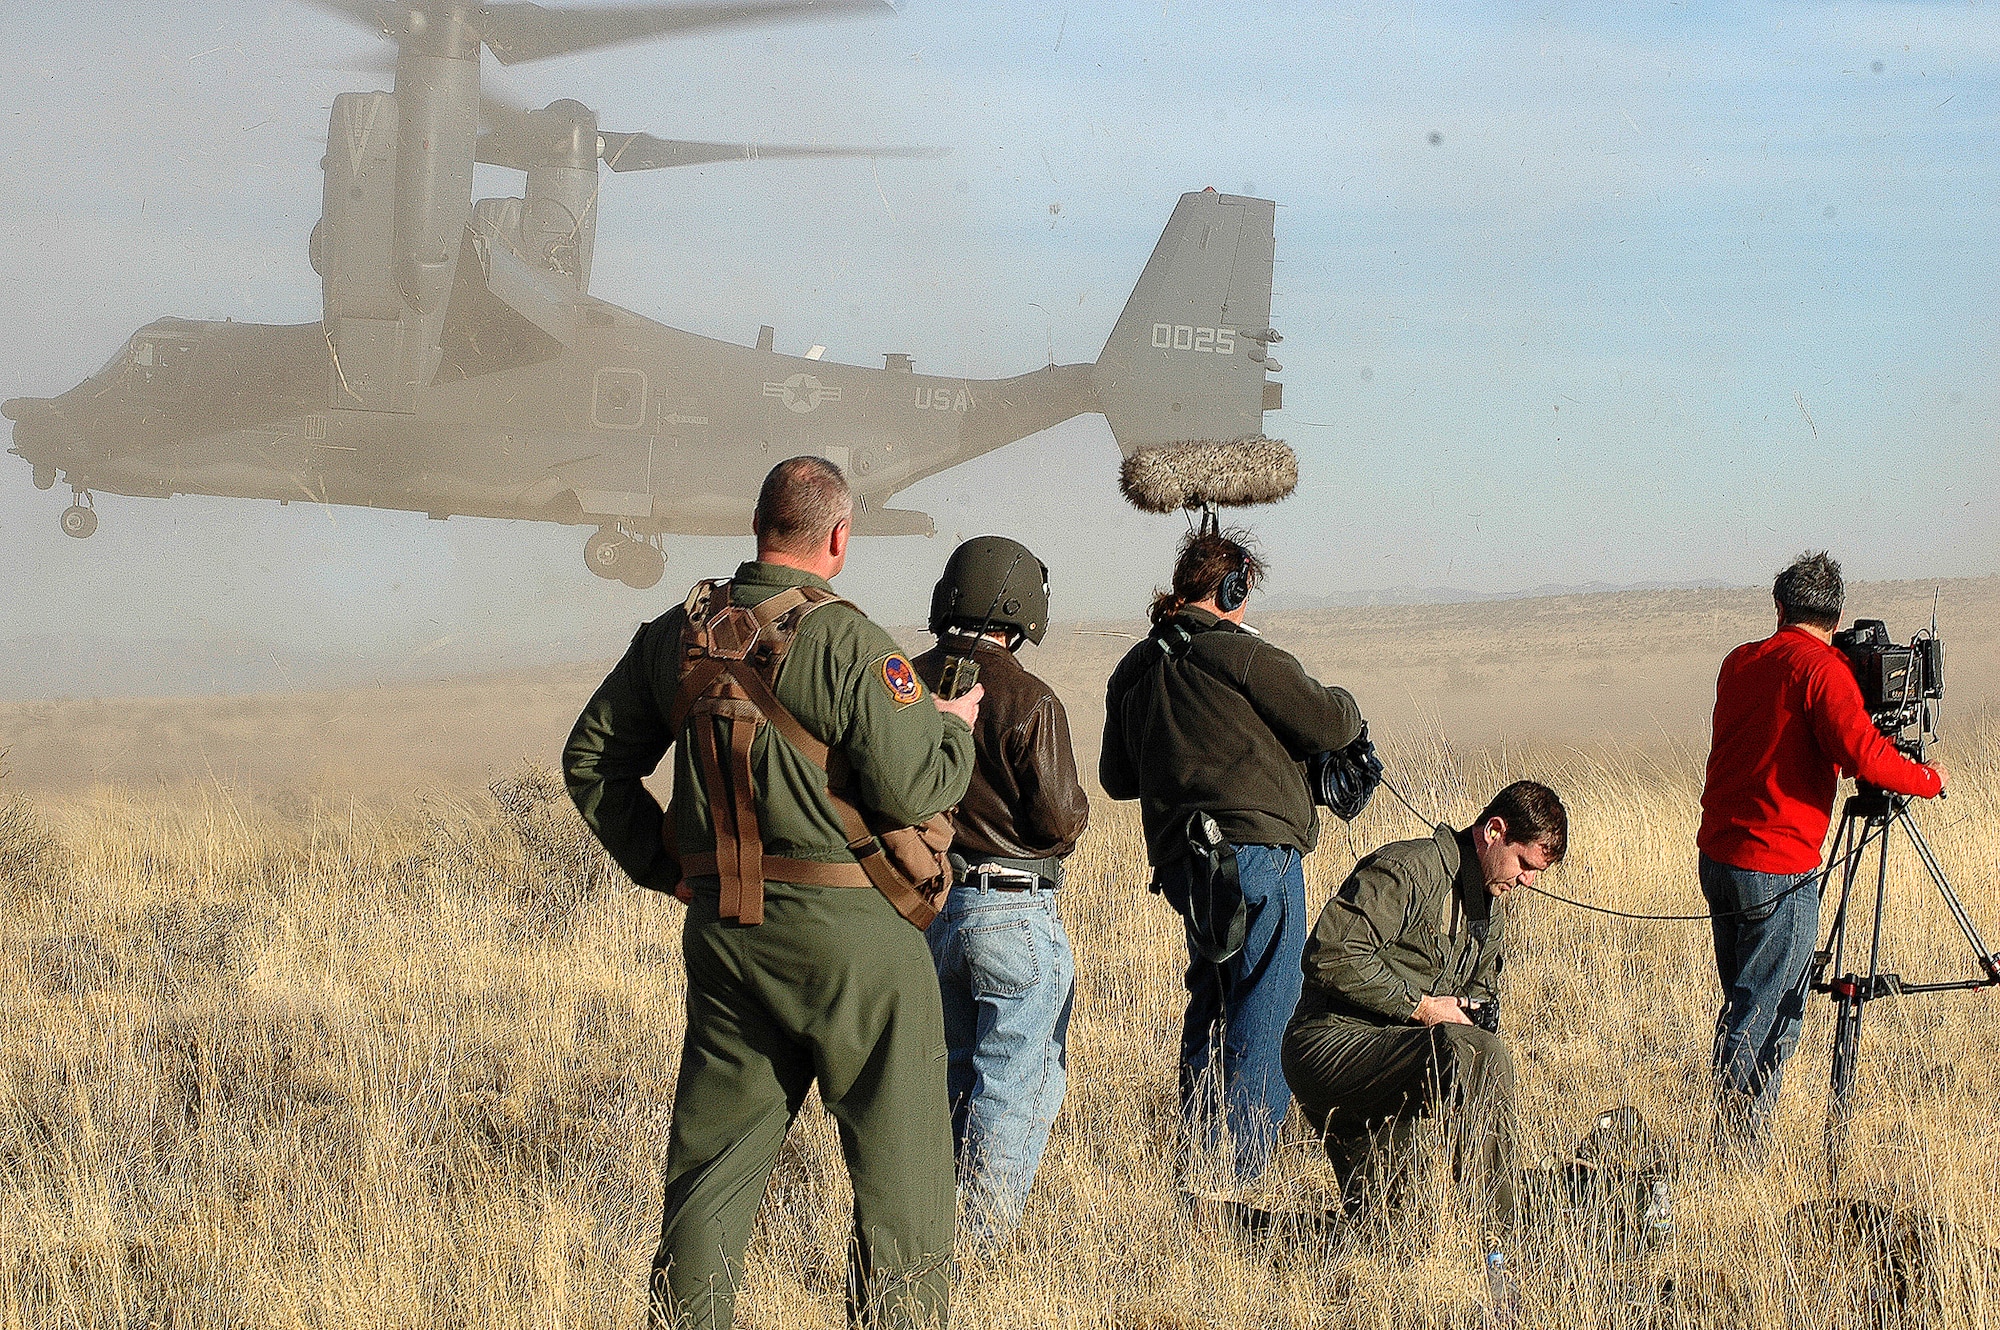 Three reporters working with the History Channel, accompanied by James Darcy (kneeling), V-22 Osprey Program public affairs officer, and a flight engineer from the 71st Special Operations Squadron, film a CV-22 Osprey during a training mission at a landing zone here for a show called Modern Marvels ? Military Movers. (U.S. Air Force photo by Staff Sgt. Markus Maier)
